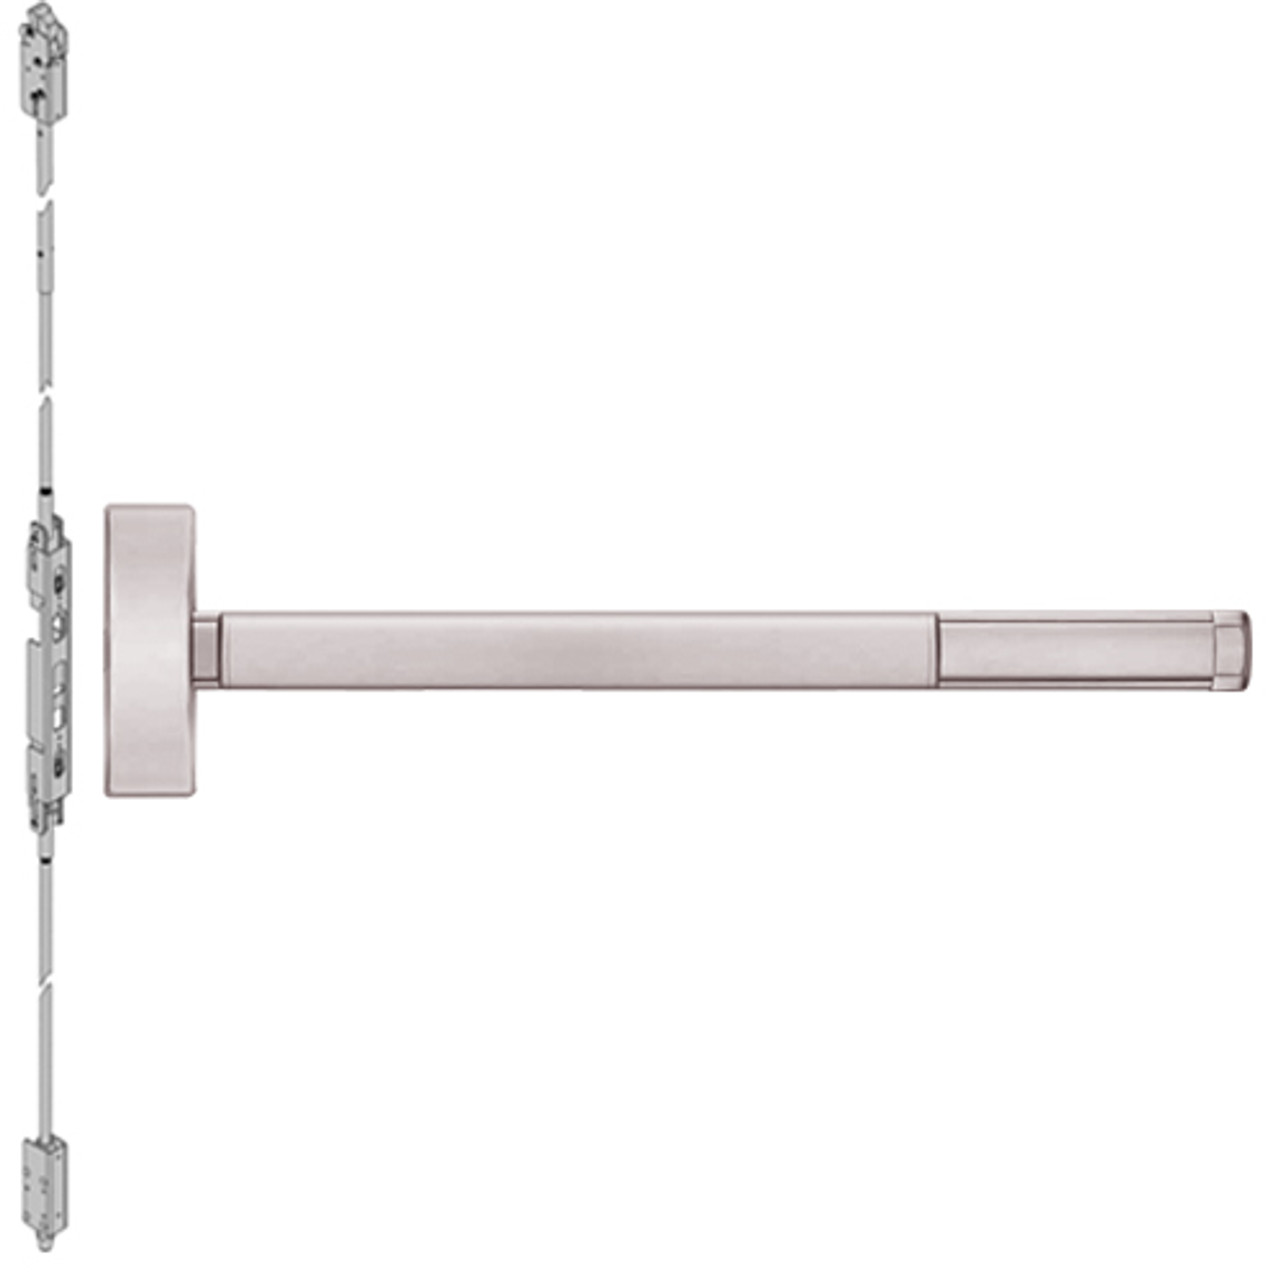 DEFL2801-628-48 PHI 2800 Series Fire Rated Concealed Vertical Rod Exit Device with Delayed Egress Prepped for Cover Plate in Satin Aluminum Finish